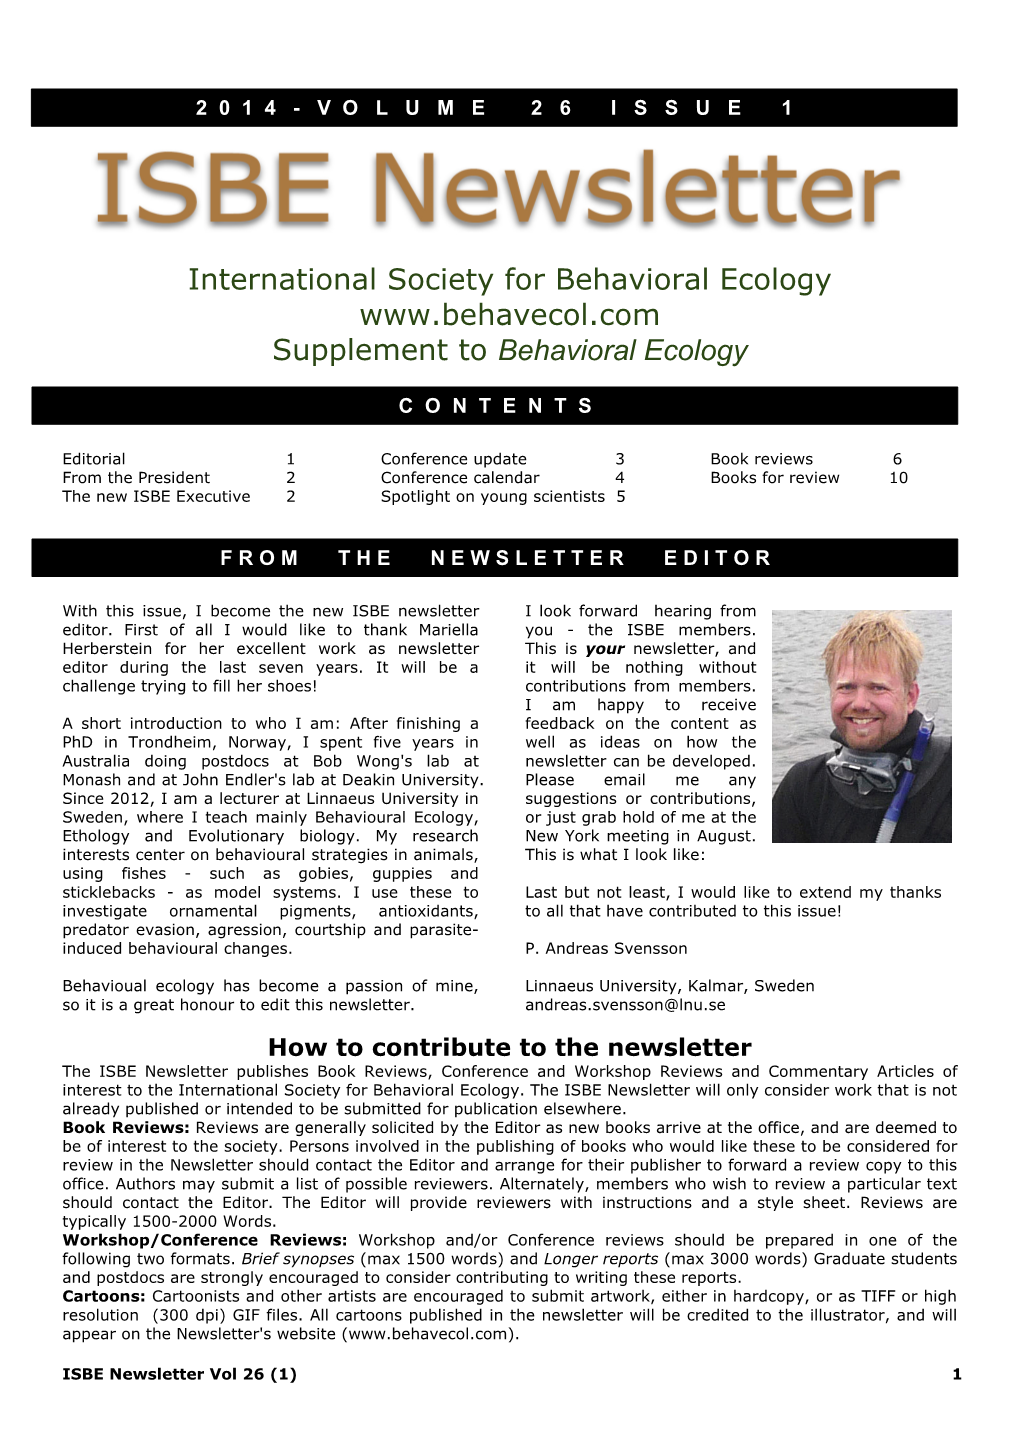 International Society for Behavioral Ecology Supplement to Behavioral Ecology